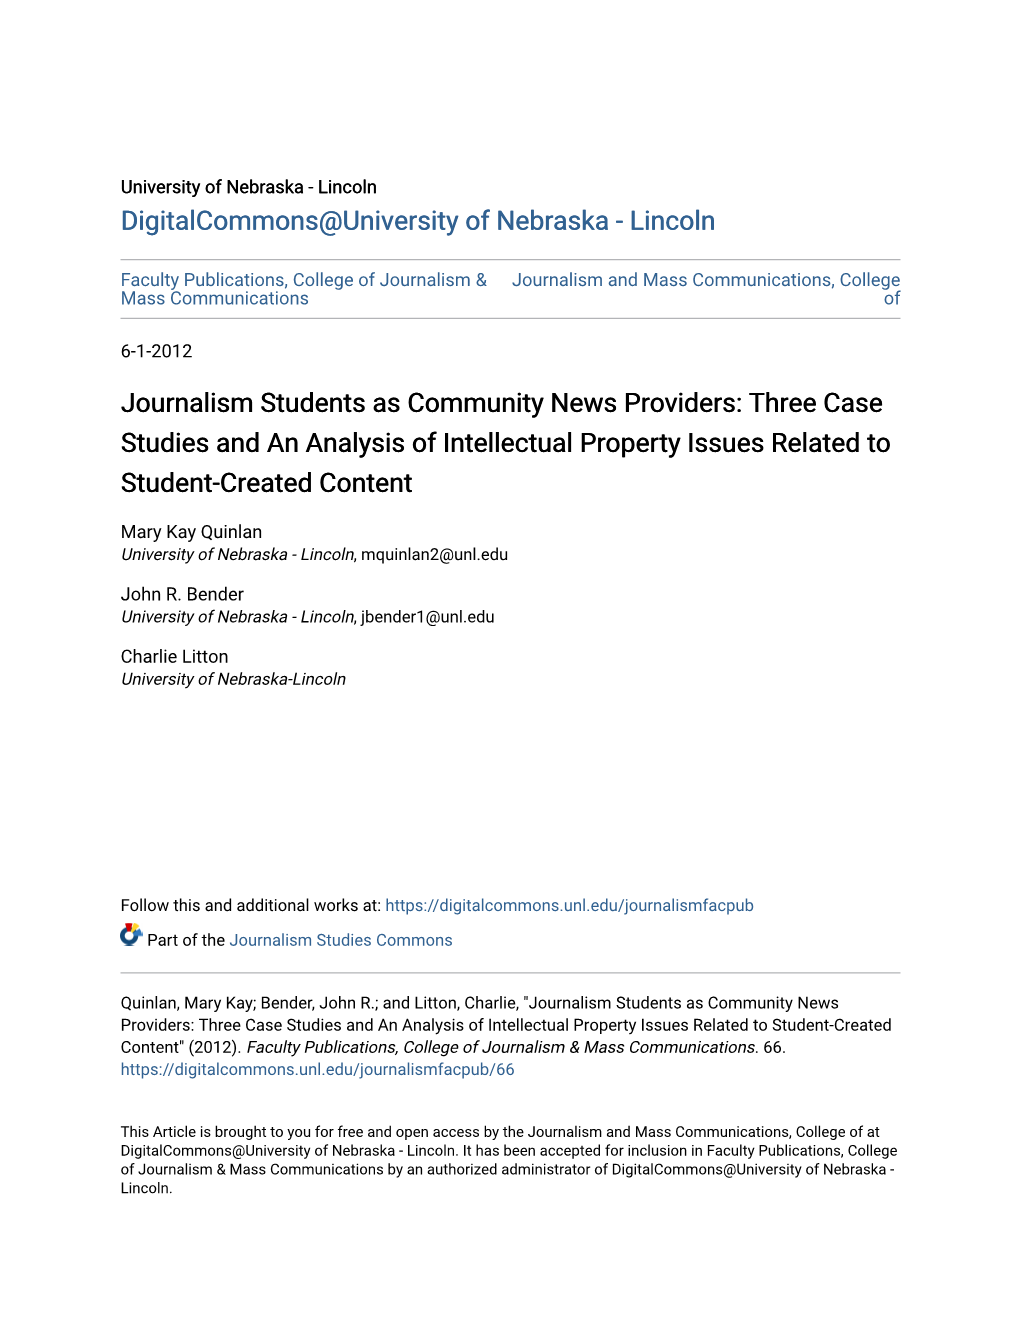 Journalism Students As Community News Providers: Three Case Studies and an Analysis of Intellectual Property Issues Related to Student-Created Content